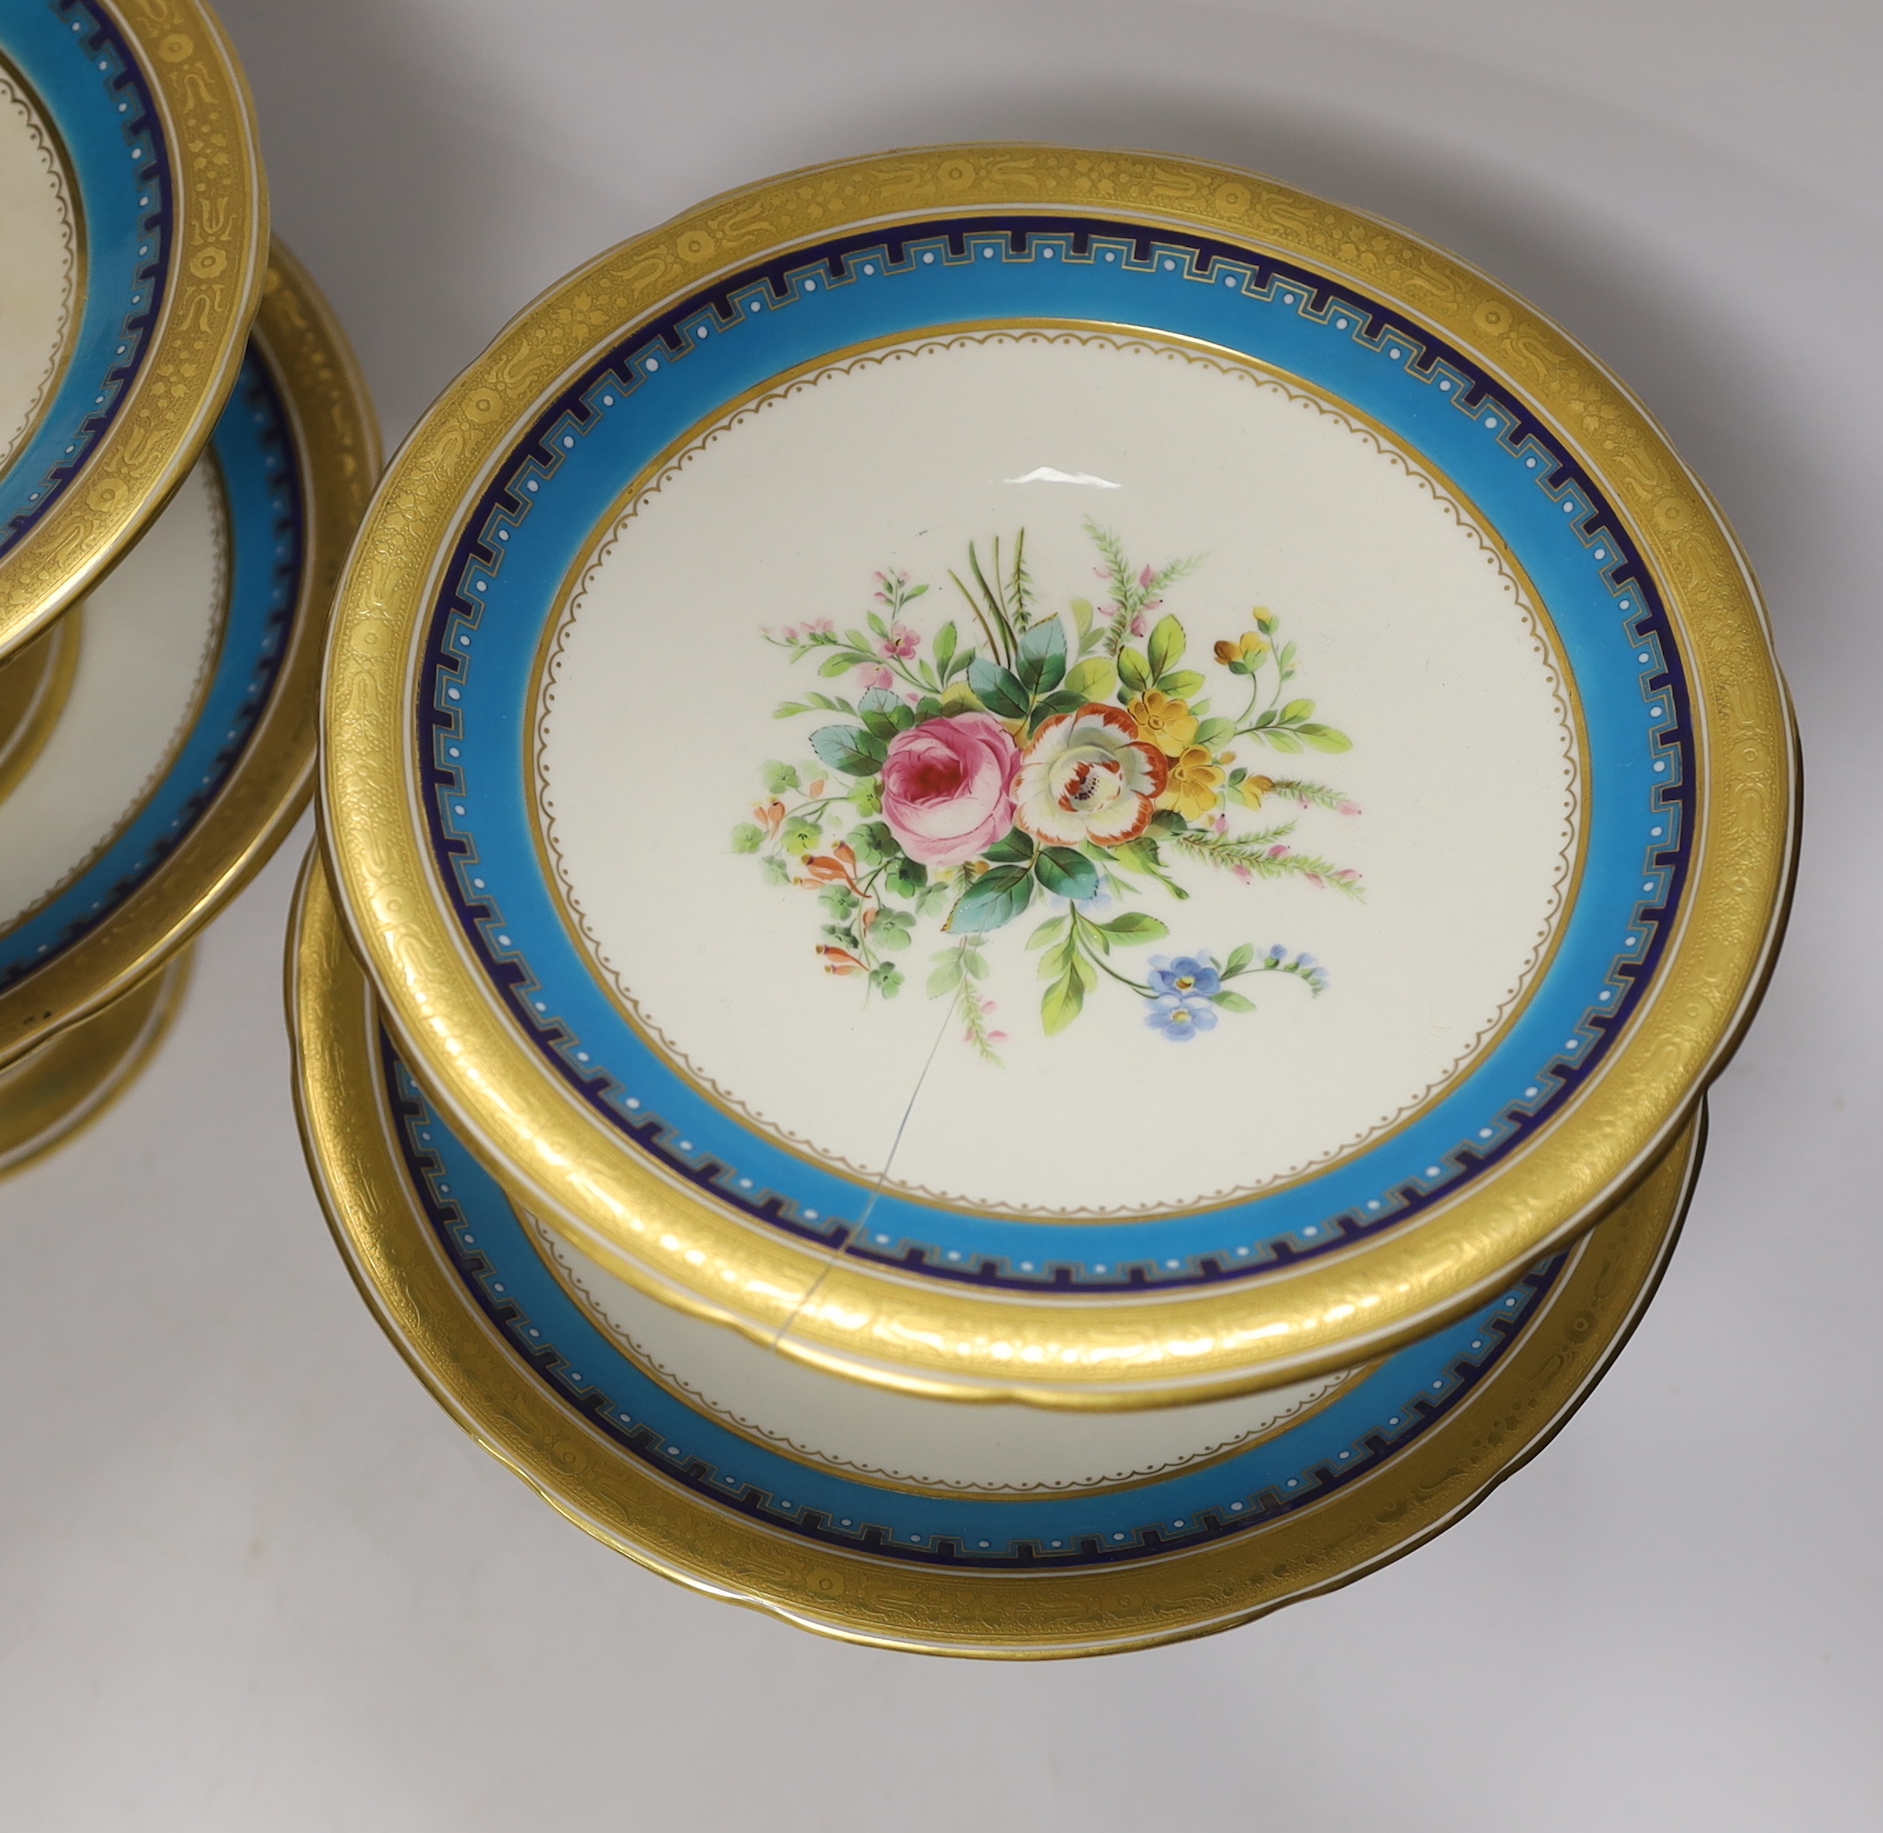 A 19th century Minton porcelain dessert service with gilt and floral decoration, twelve plates and two pairs of various height comports, tallest 16.5cm high